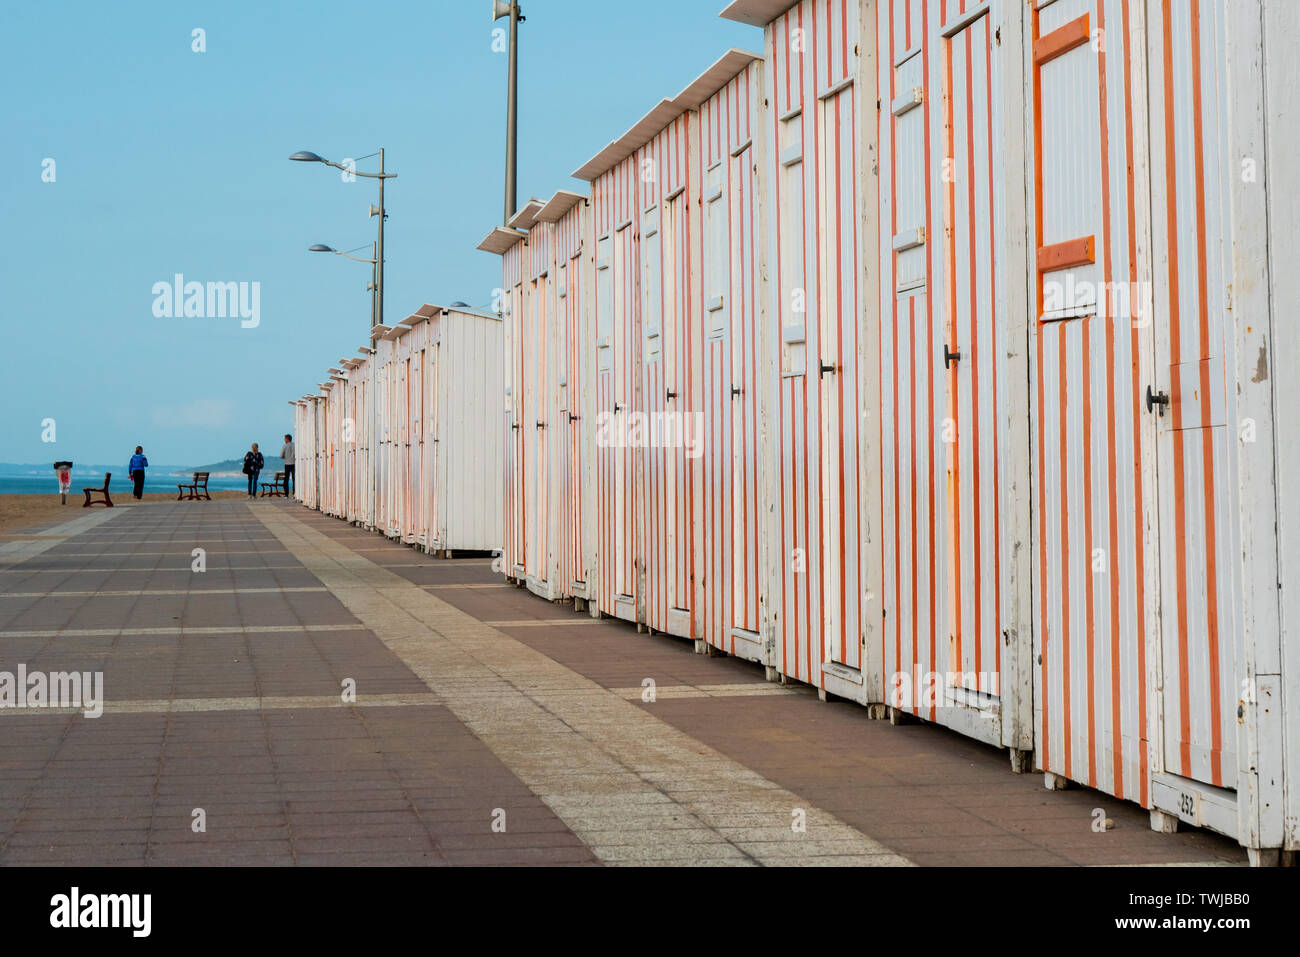 Houlgate, France - June 4, 2019: Typical houses and beach cabins of Houlgate. Stock Photo